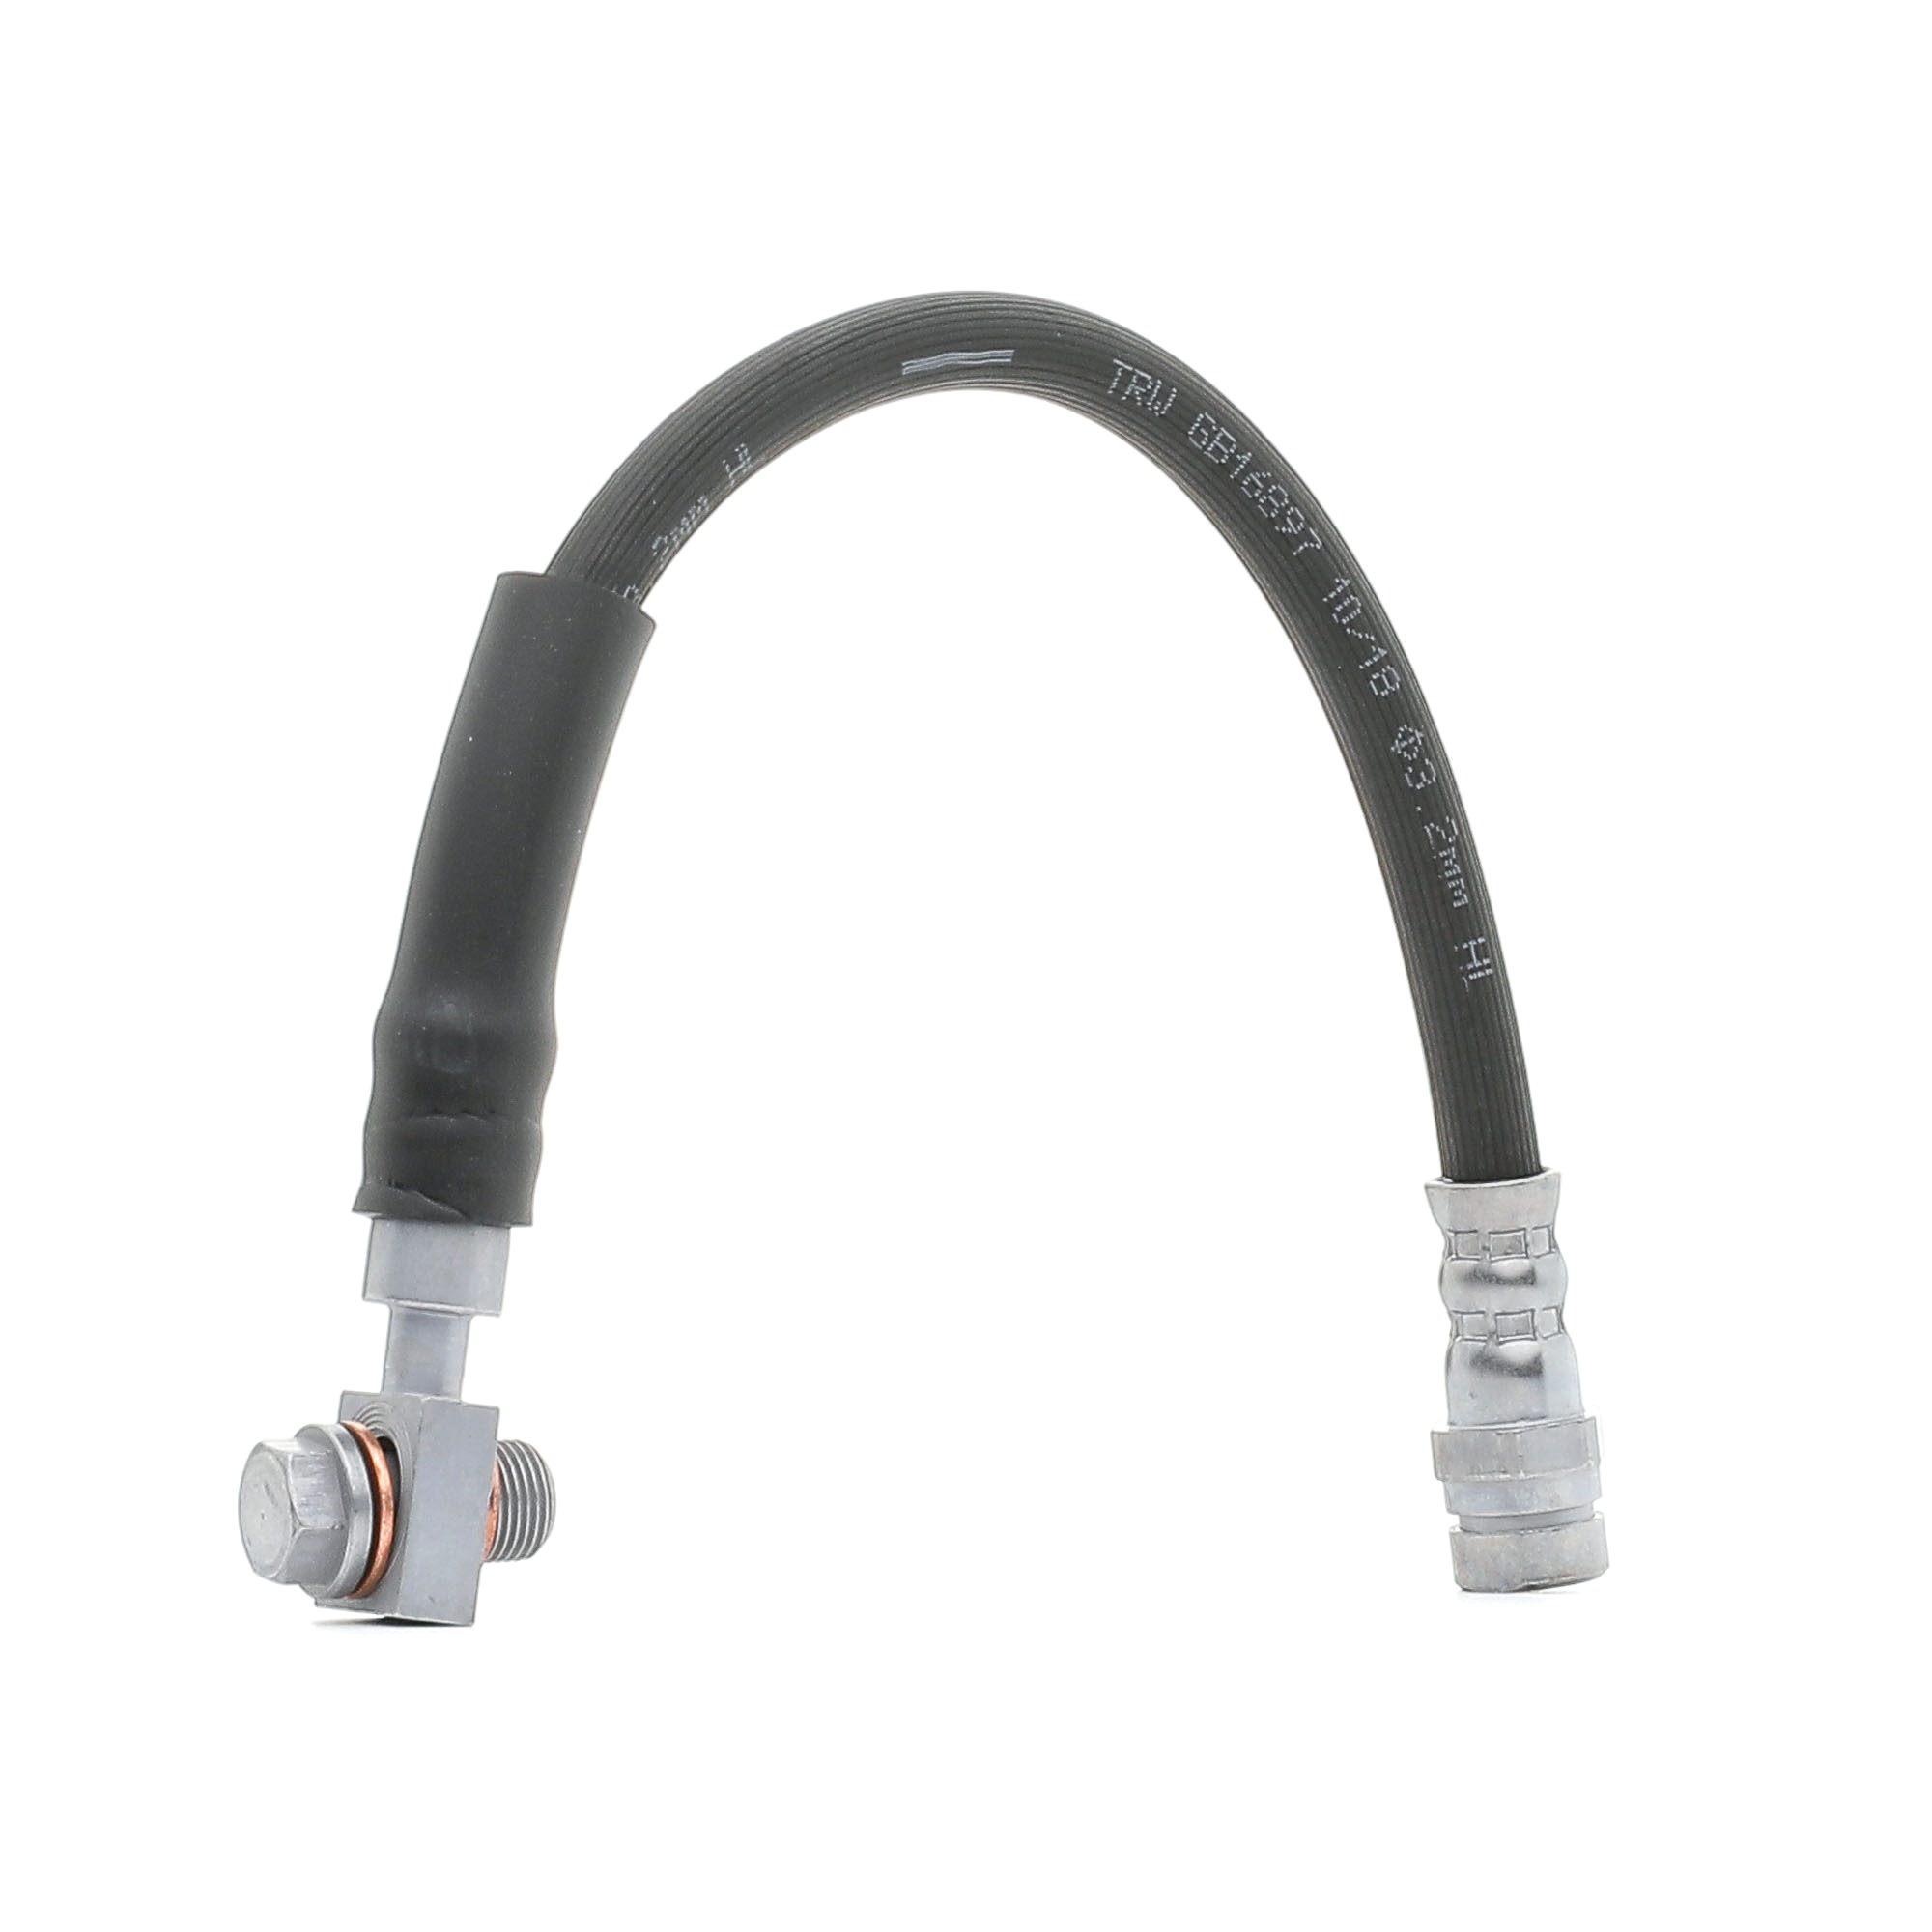 Seat Leon 3 ST Pipes and hoses parts - Brake hose TRW PHD2021